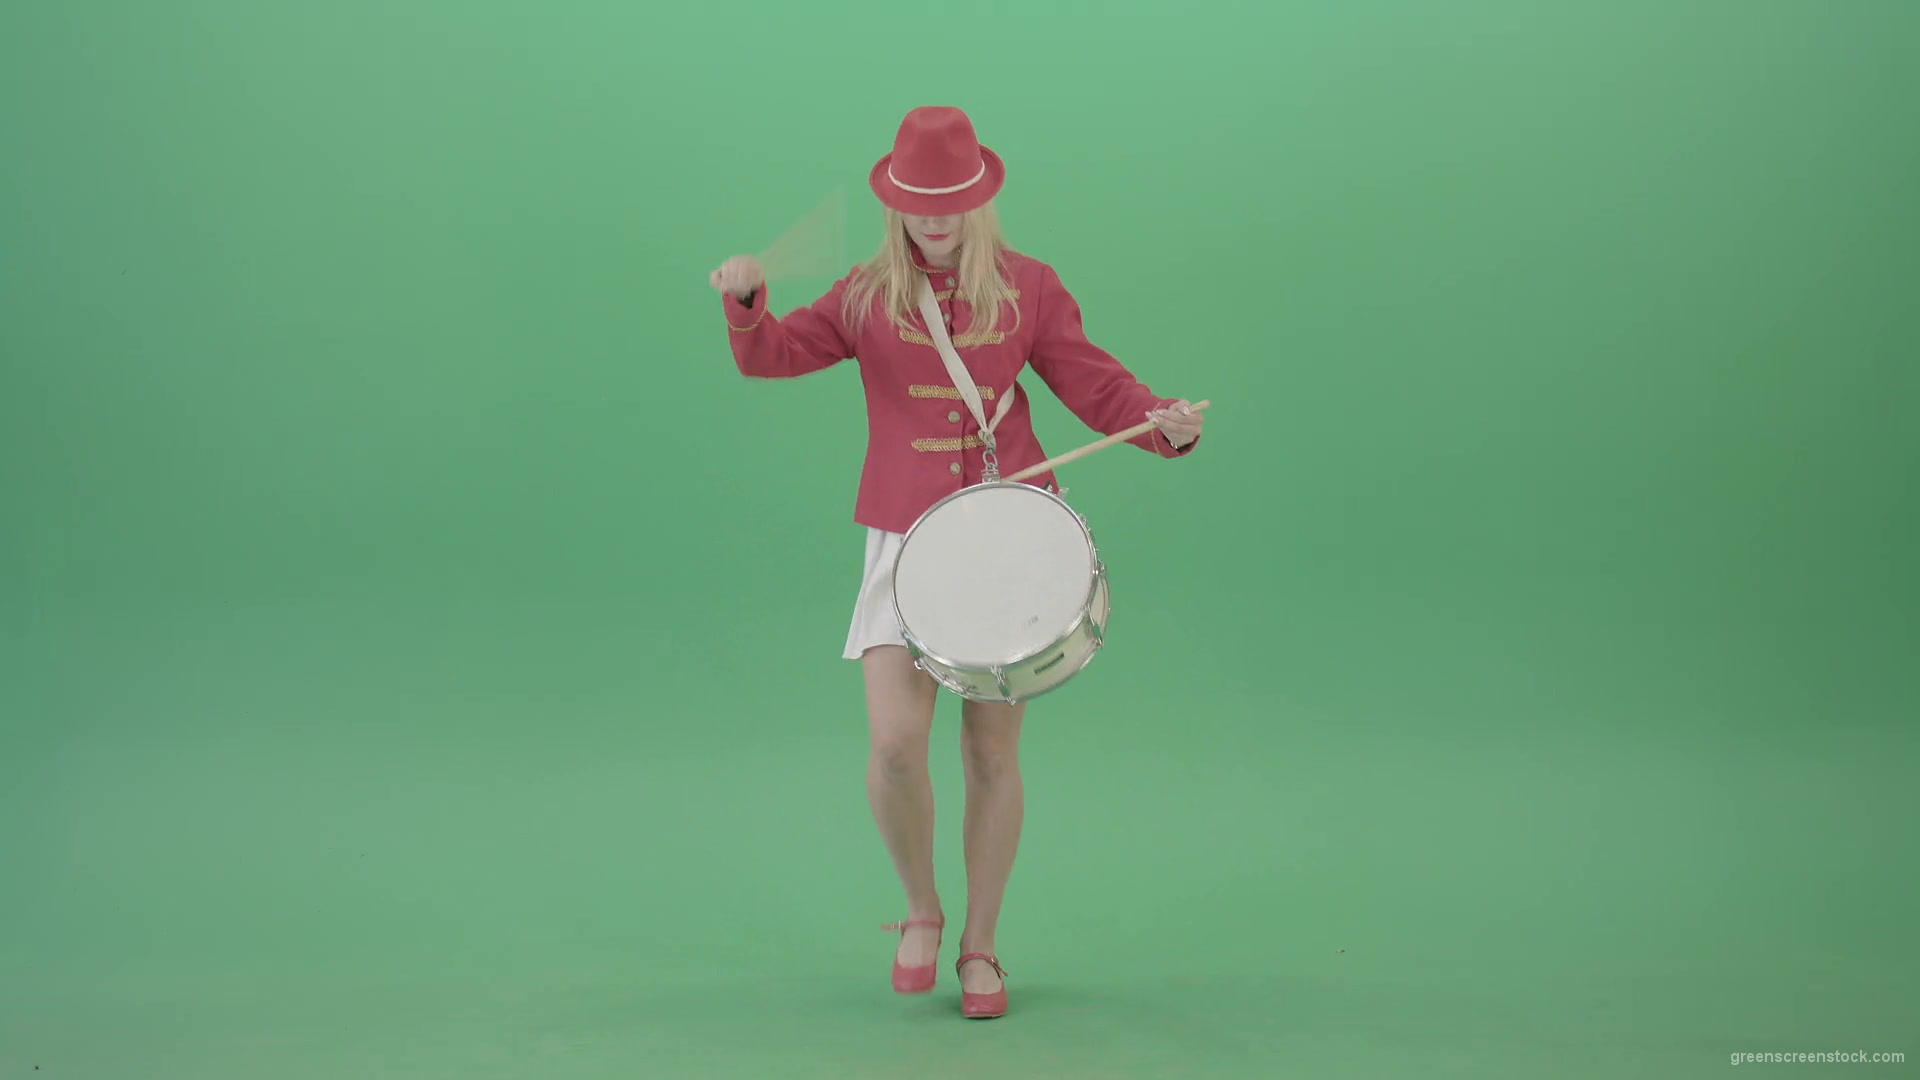 vj video background Girl-in-red-dress-marching-and-playing-drum-snare-music-instrument-over-green-screen-4K-Video-Footage-1920_003